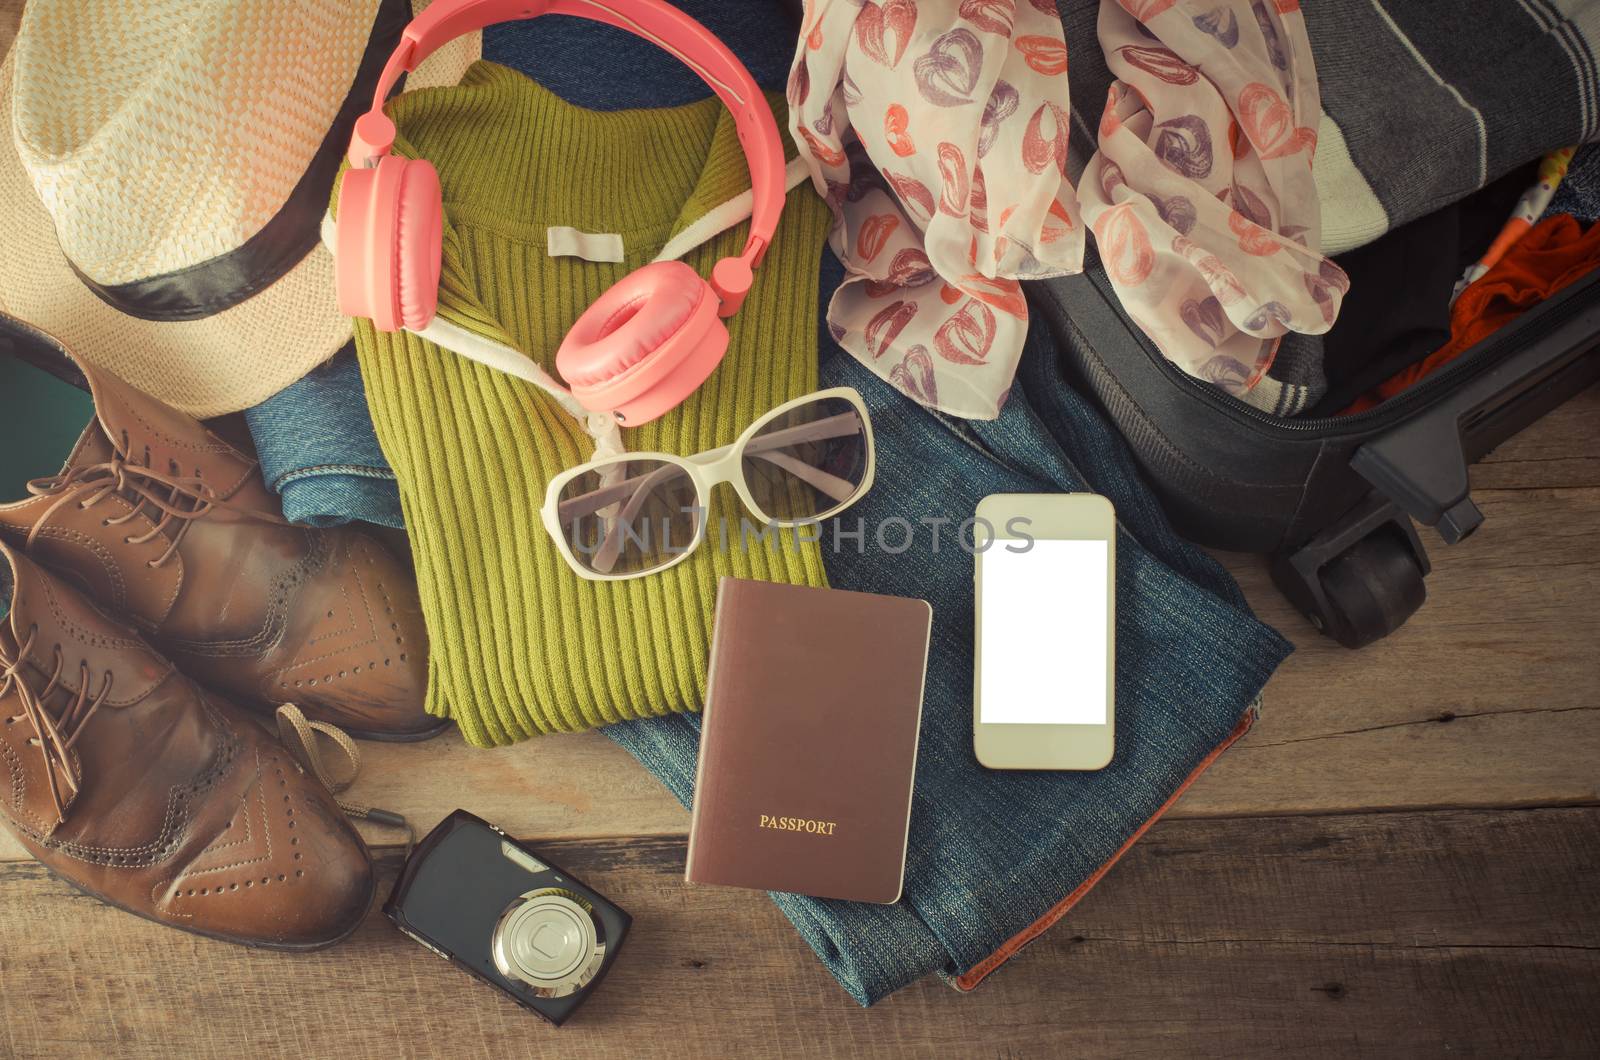 Travel accessories, clothes Wallet, glasses, phone headset. Passport, shoes. Ready for travel